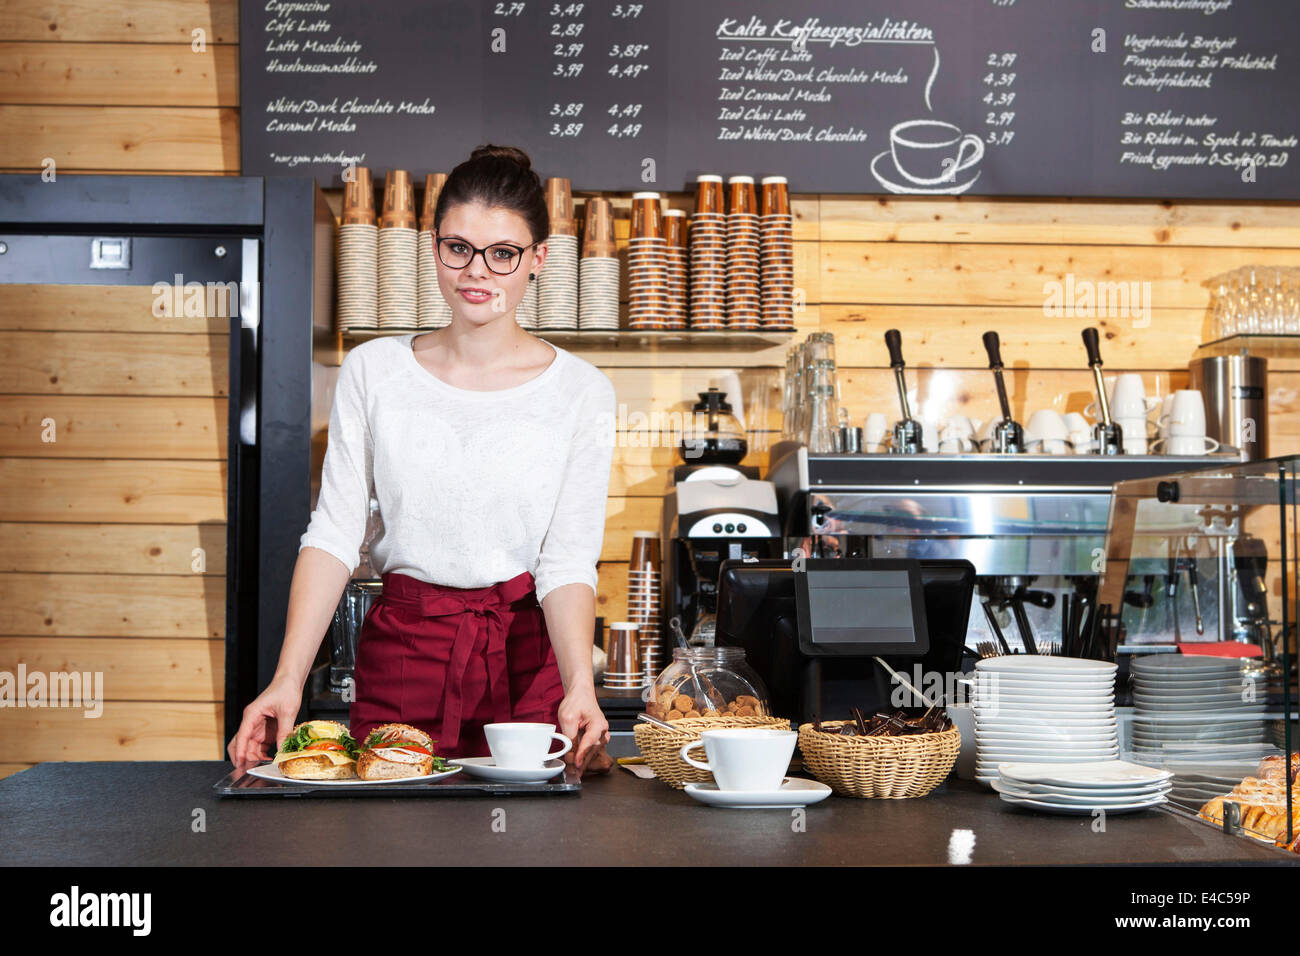 Waitress in coffee shop serving sandwiches on a tray Stock Photo